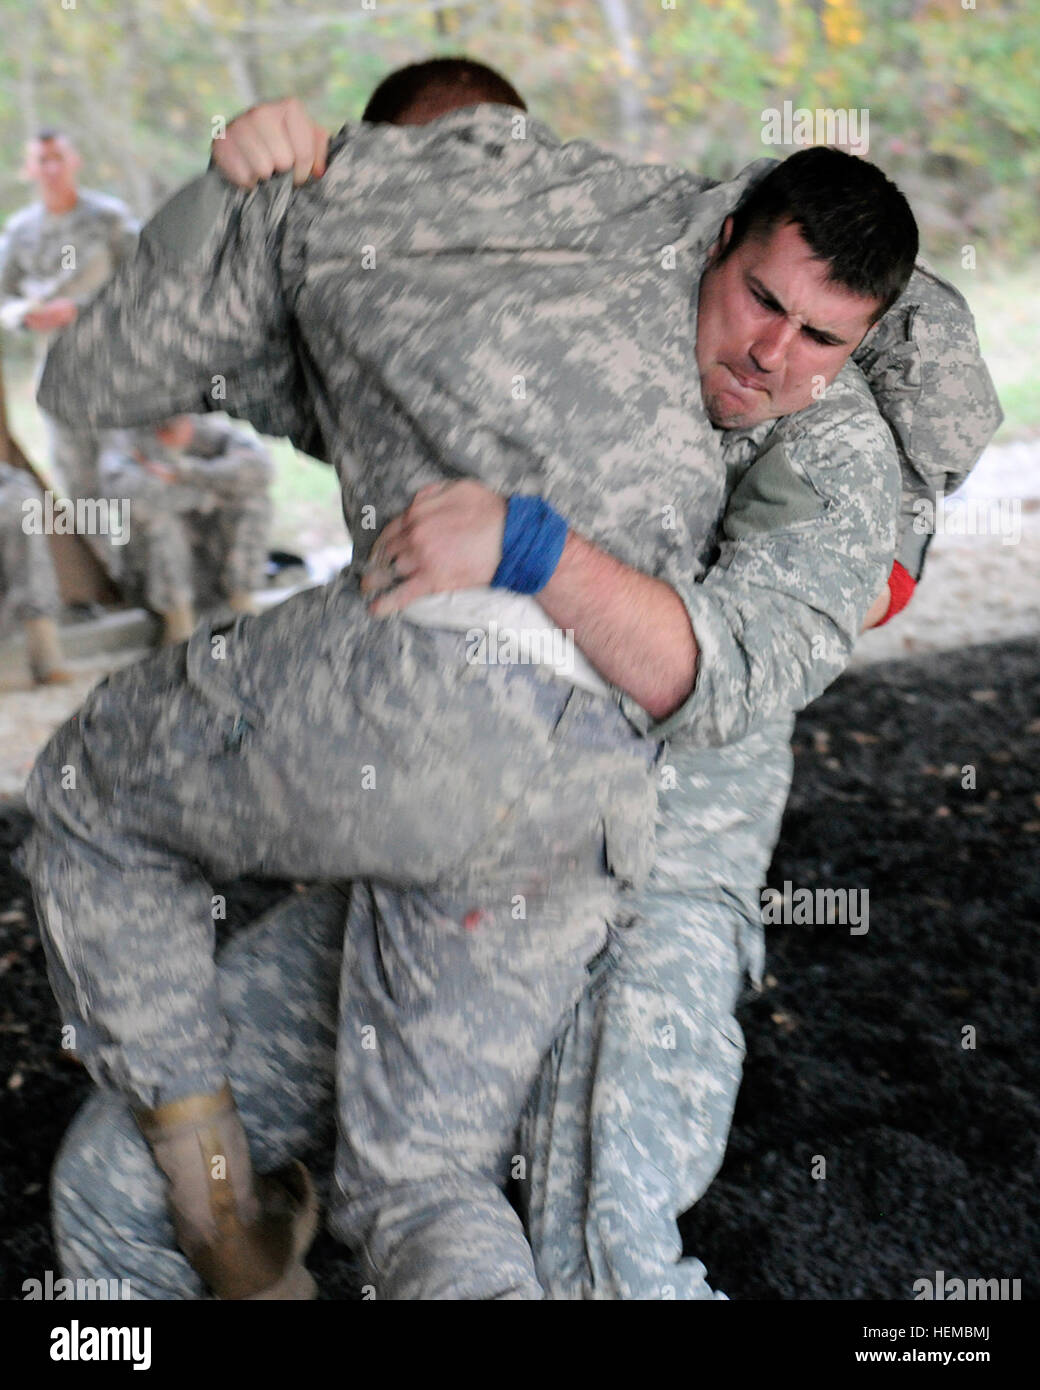 Sgt. 1st Class Thomas L. Guess (right), Jackson, Miss., of the Camp  Shelby-based 154th Regiment, lifts Spc. Charles Todd, Clinton, Miss., a  member of the 2nd Battalion, 20th Special Forces Group, during